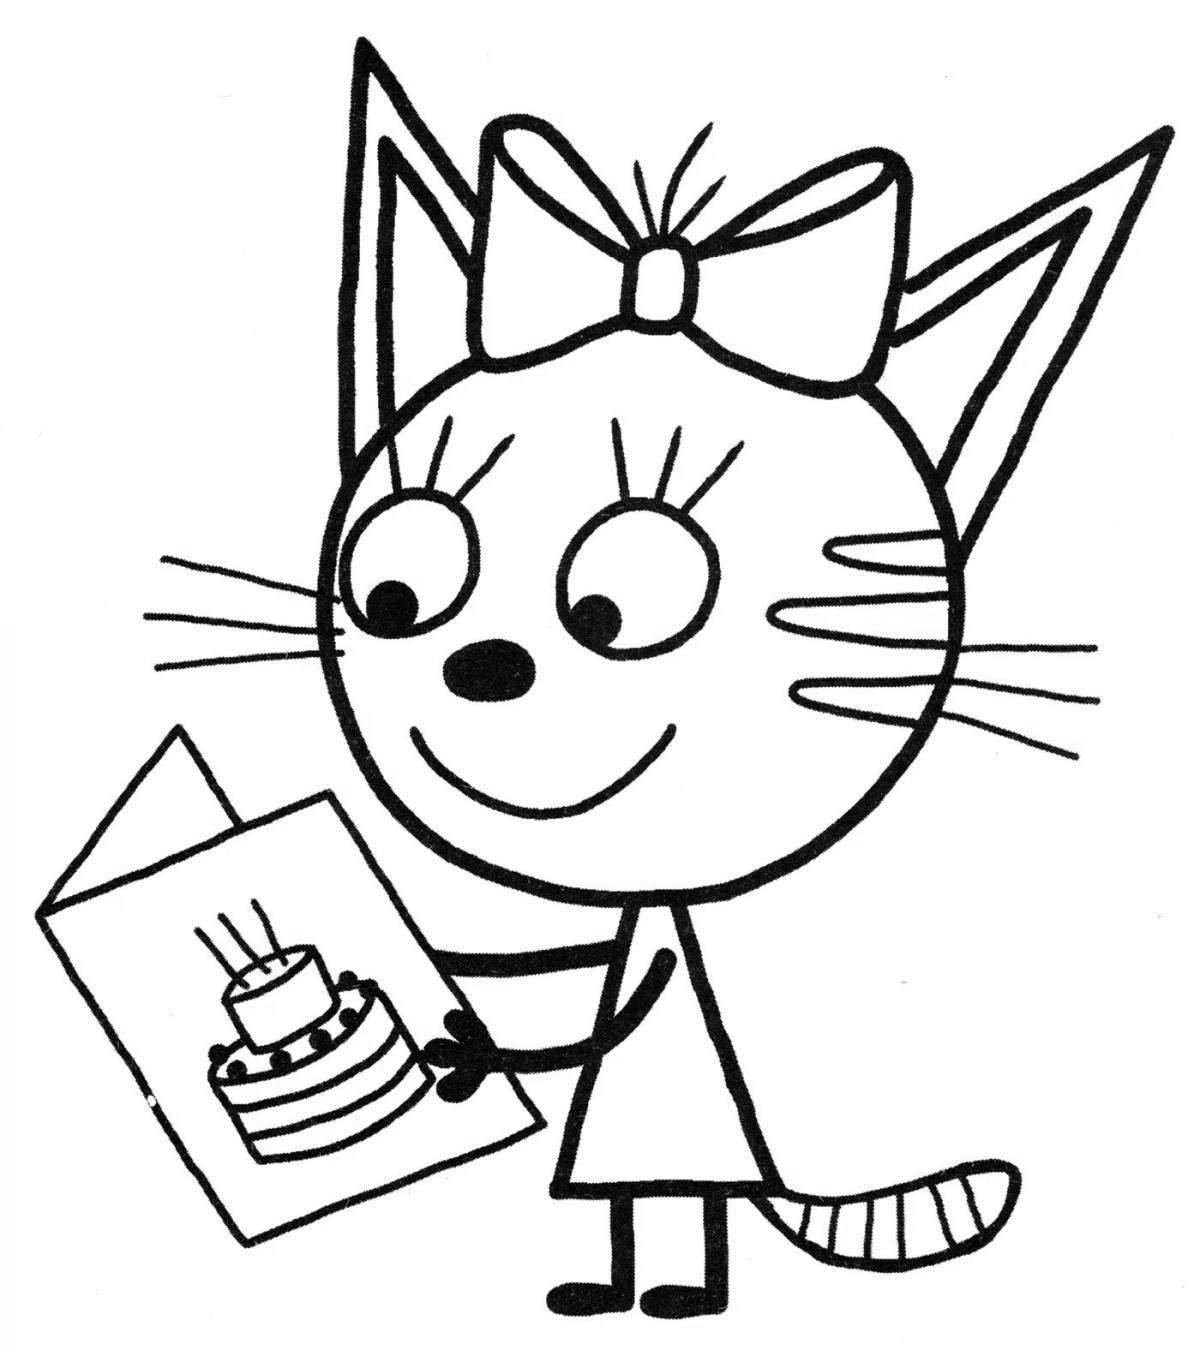 Colorful three caramel cats coloring page